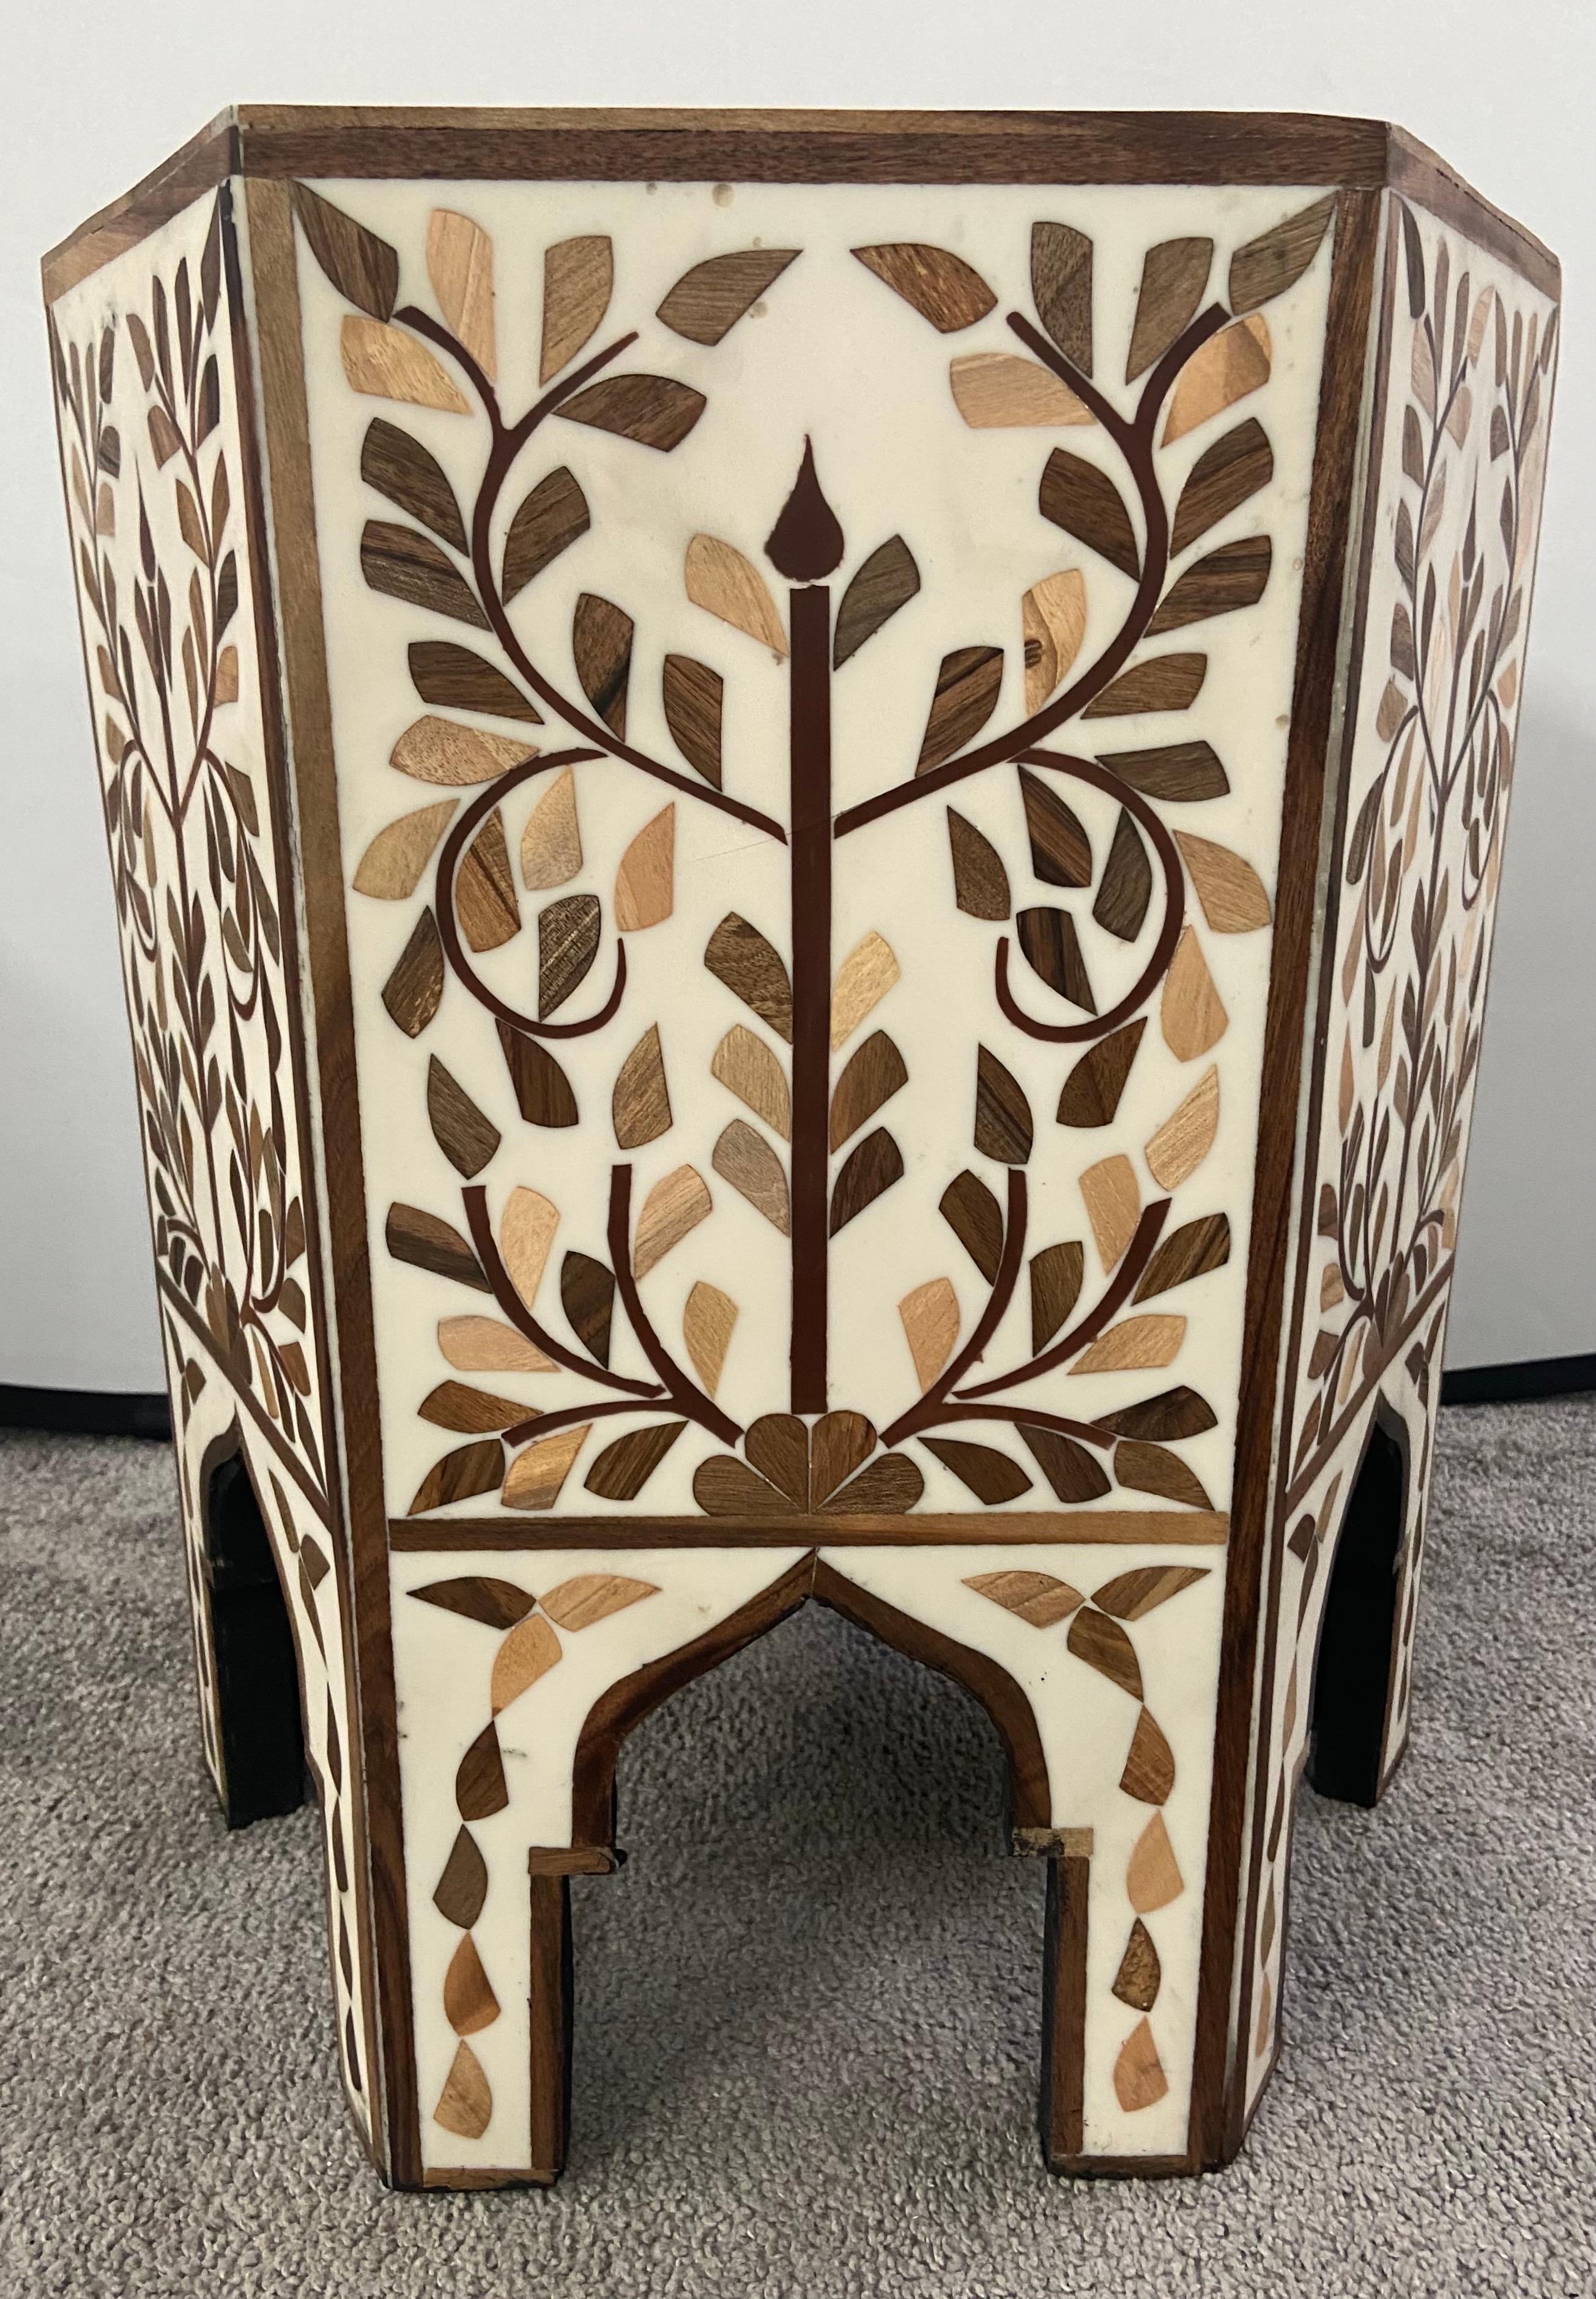 Late 20th Century Moroccan Hexagonal Side, End Table with Leaf Design, a Pair